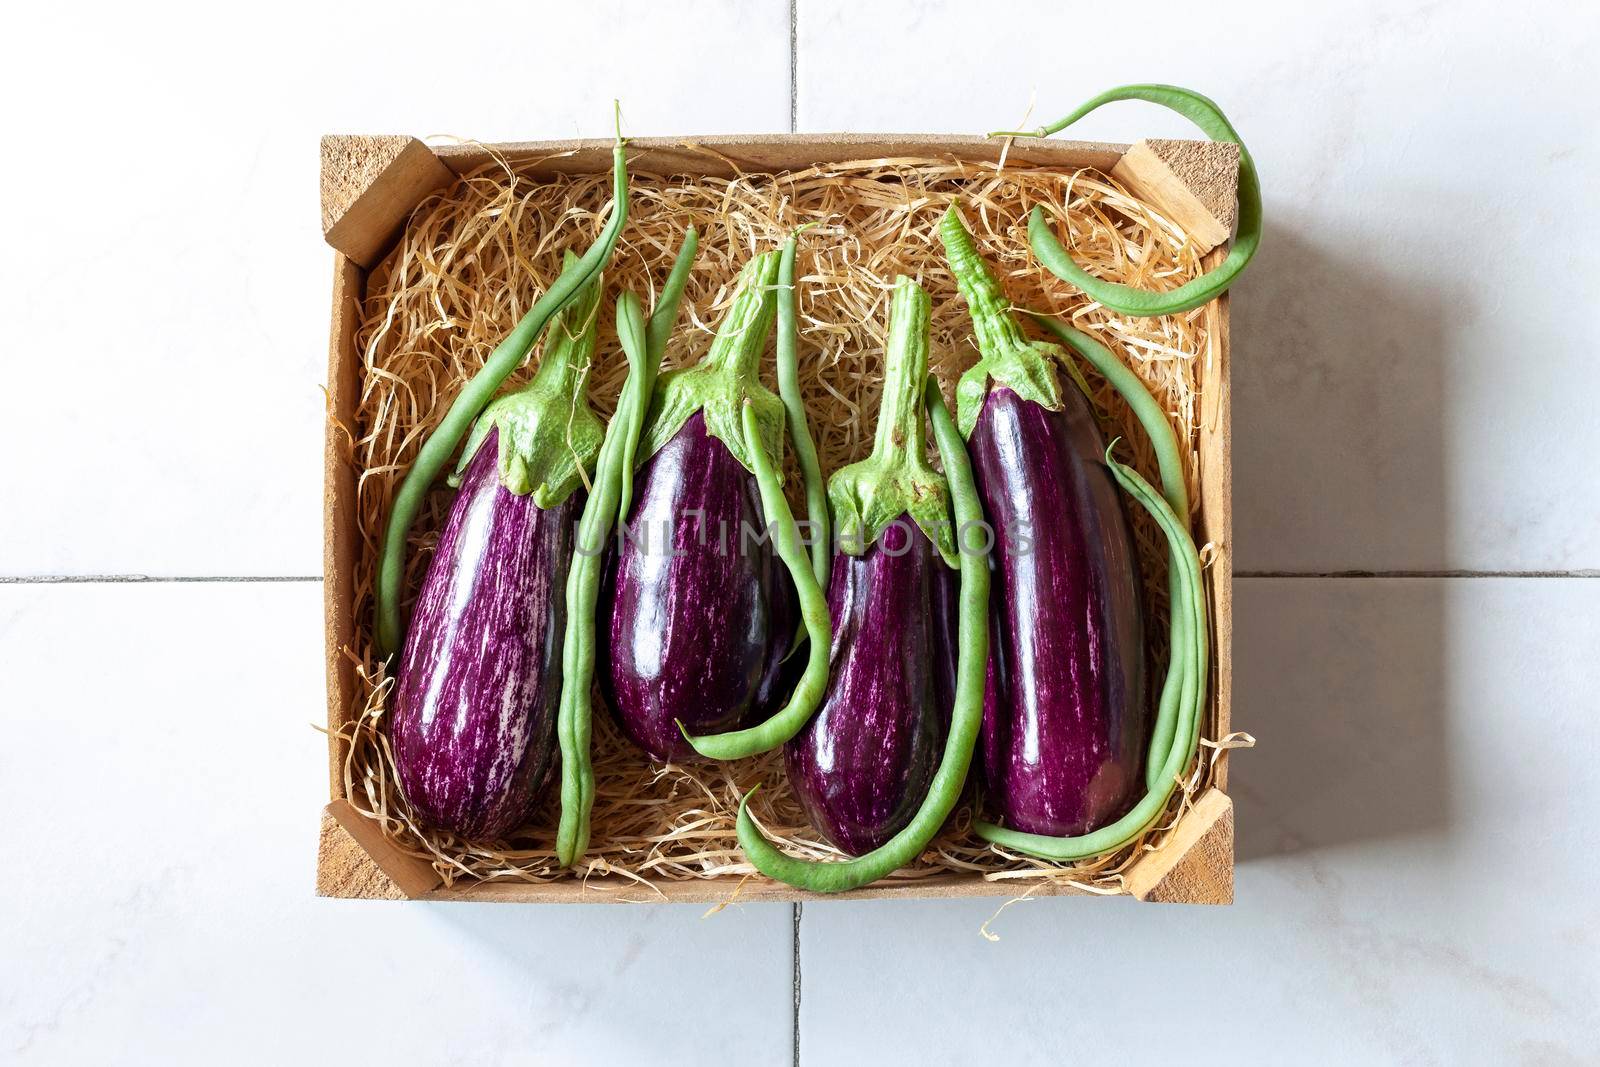 eggplants and green beans in a vegetable wooden case on tiles background, idea of harvest time, top view